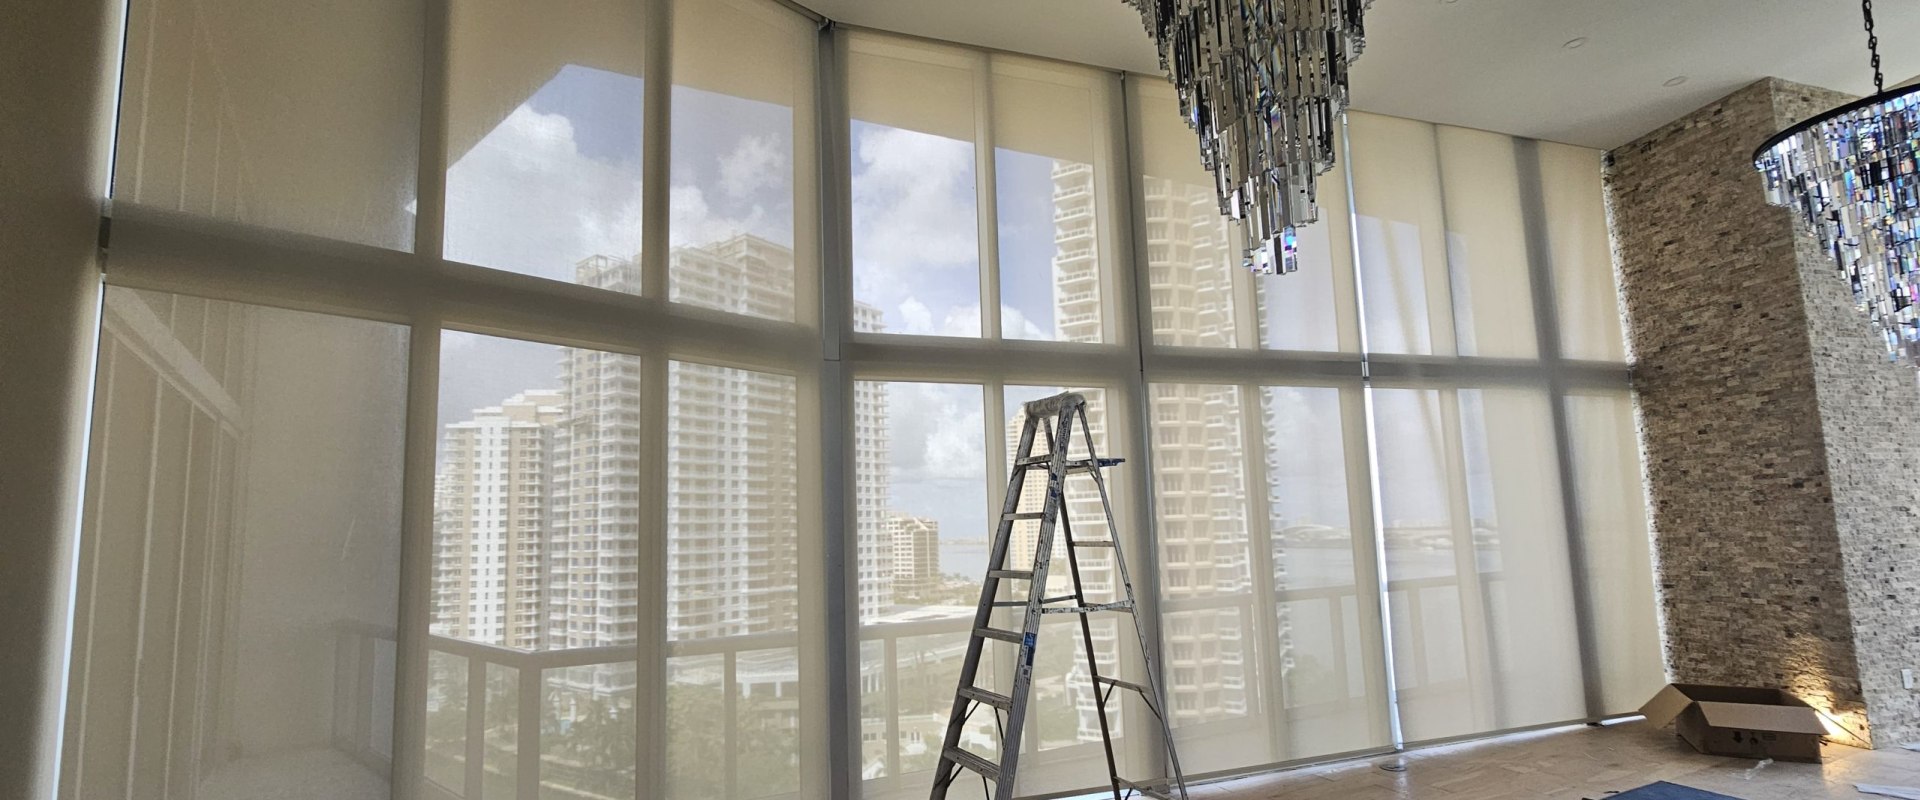 Safety Precautions for Installing a UV Light in West Palm Beach, FL